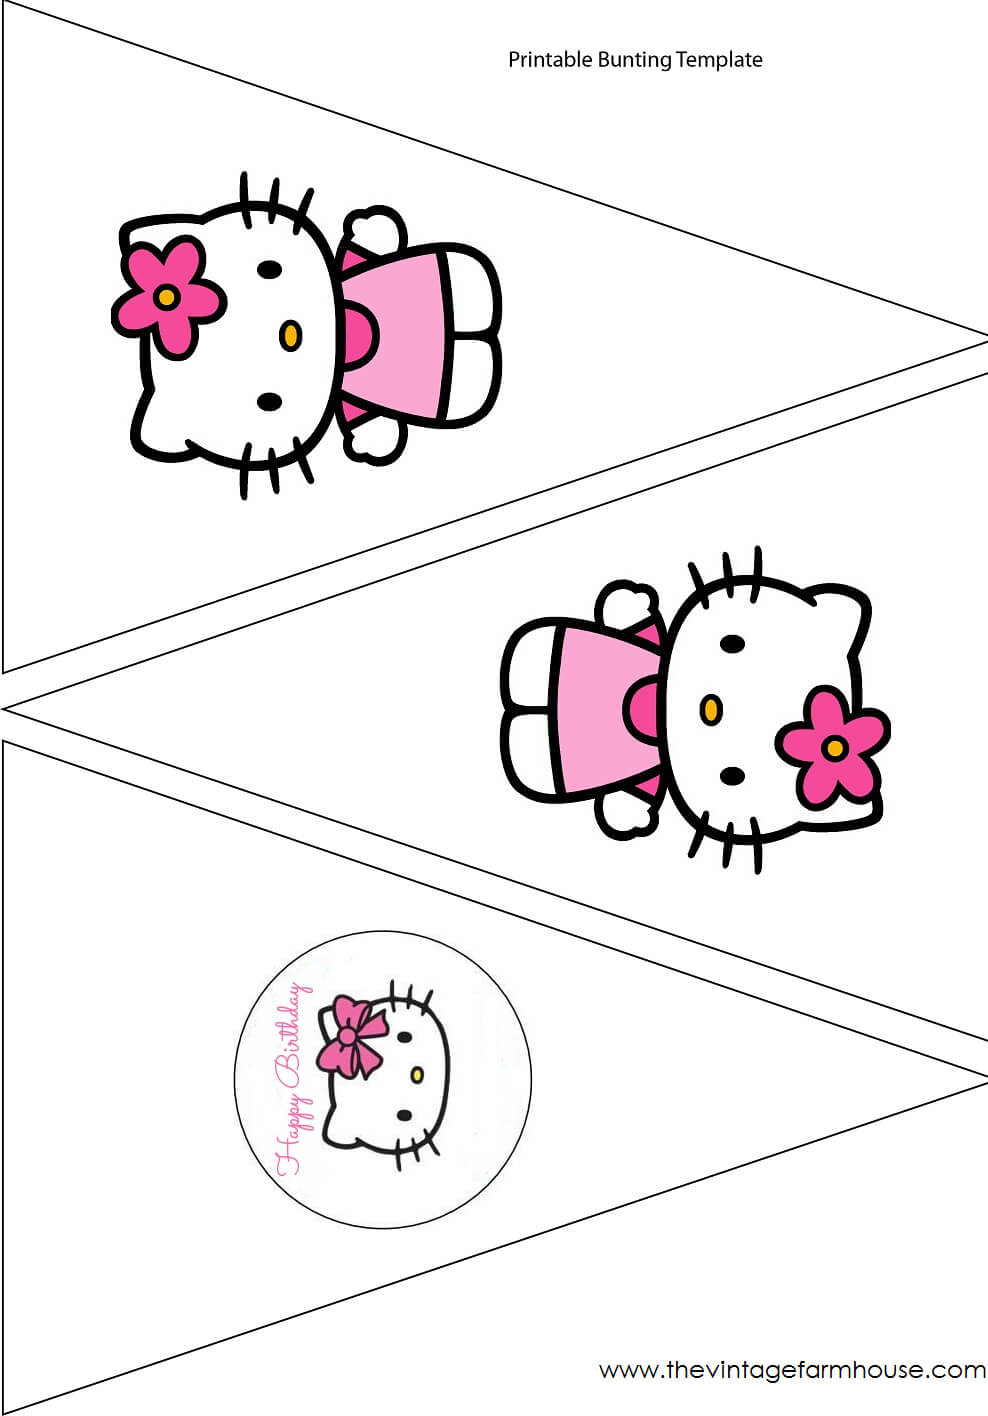 Simple Cute Hello Kitty Free Printable Kit. - Oh My Fiesta In Hello Kitty Banner Template